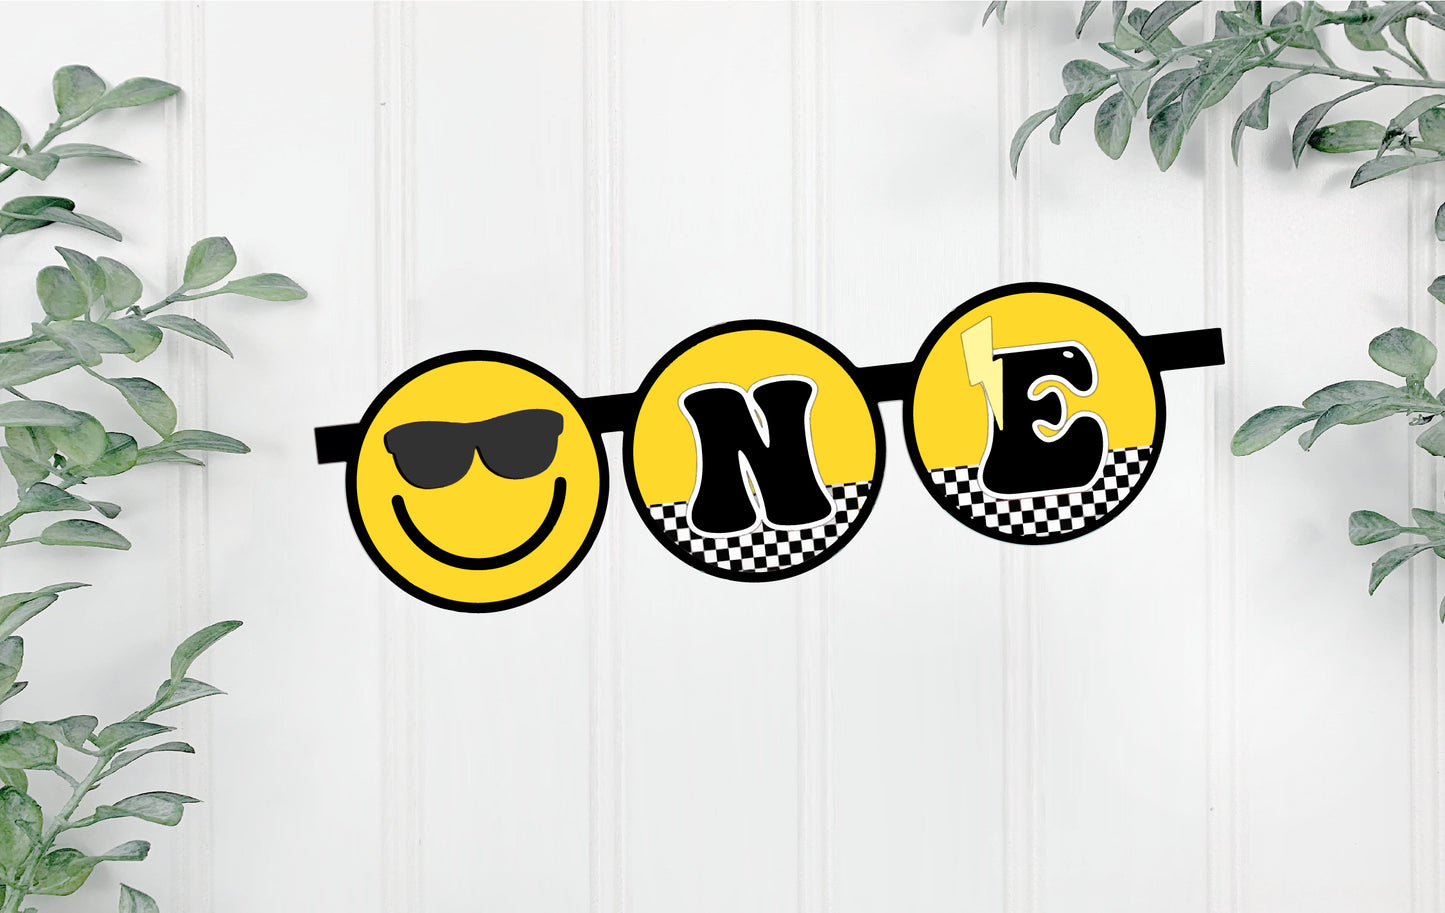 One Happy Dude High Chair banner (Yellow)